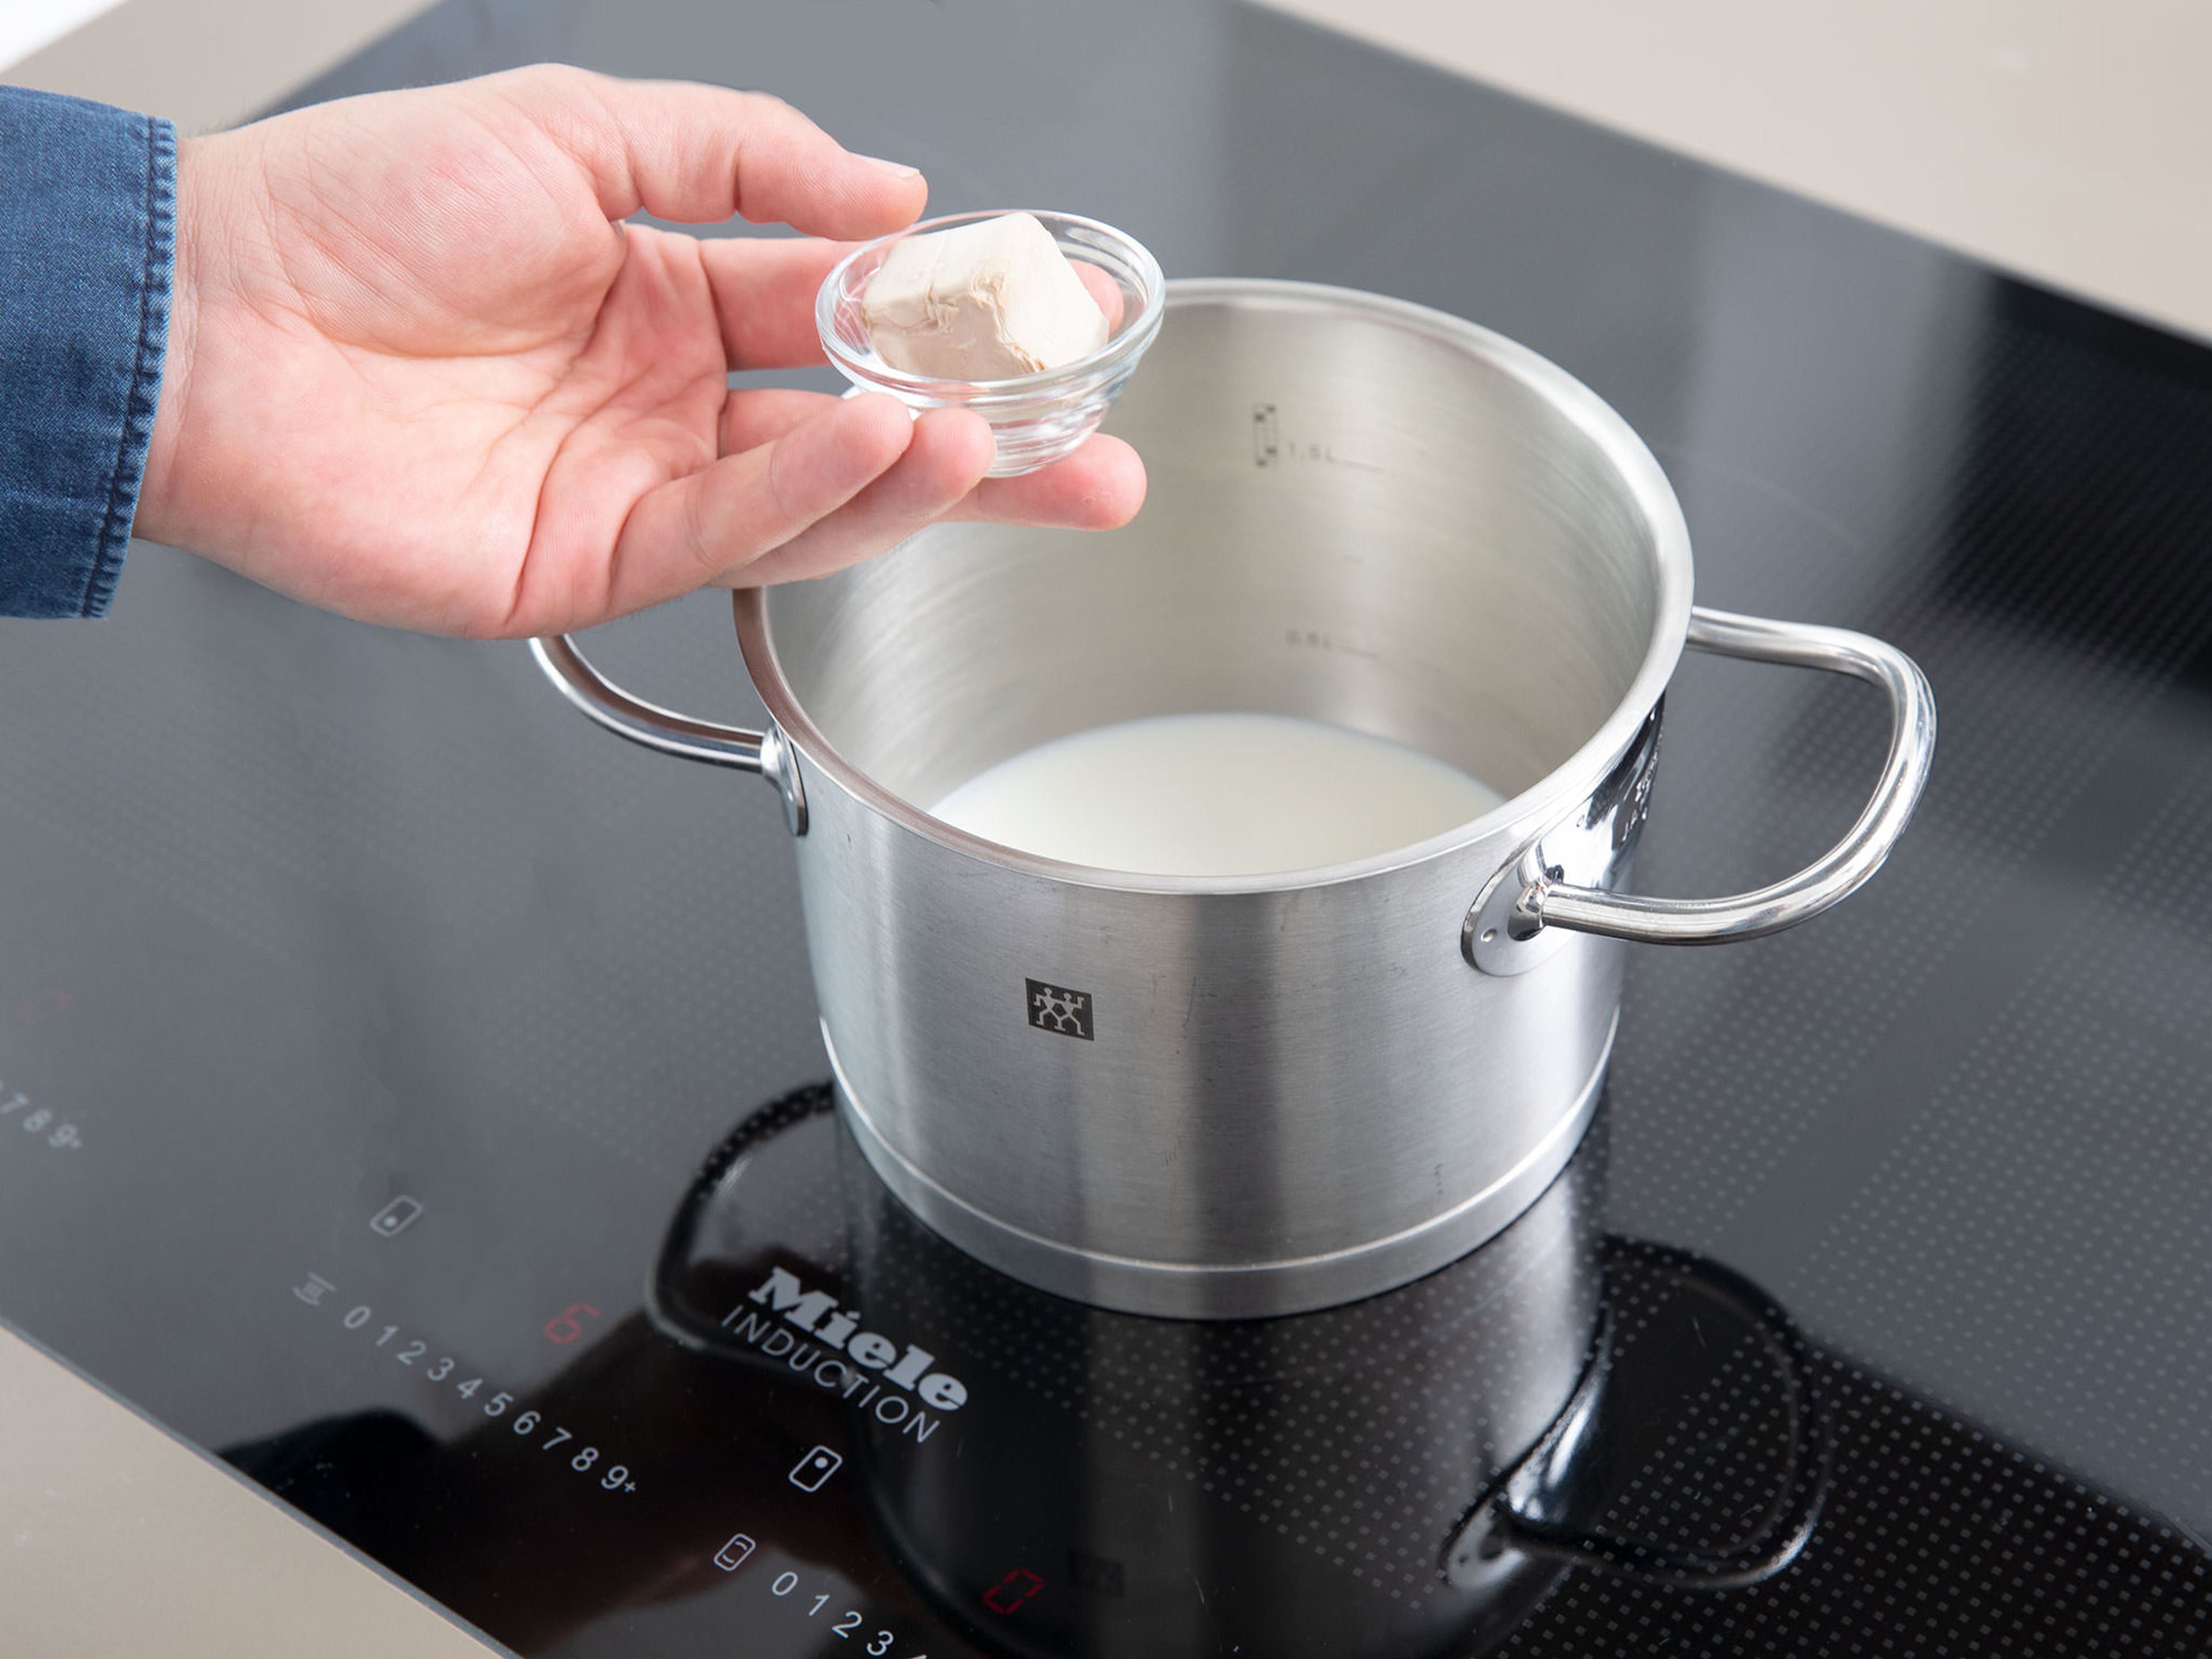 Preheat oven to 50°C/120°F. Heat milk in a small pot, add yeast and sugar and whisk to combine. Let cook until yeast and sugar are completely dissolved. Whisk in some flour and cover with a kitchen towel. Transfer to the oven and let rest for approx. 10 min.